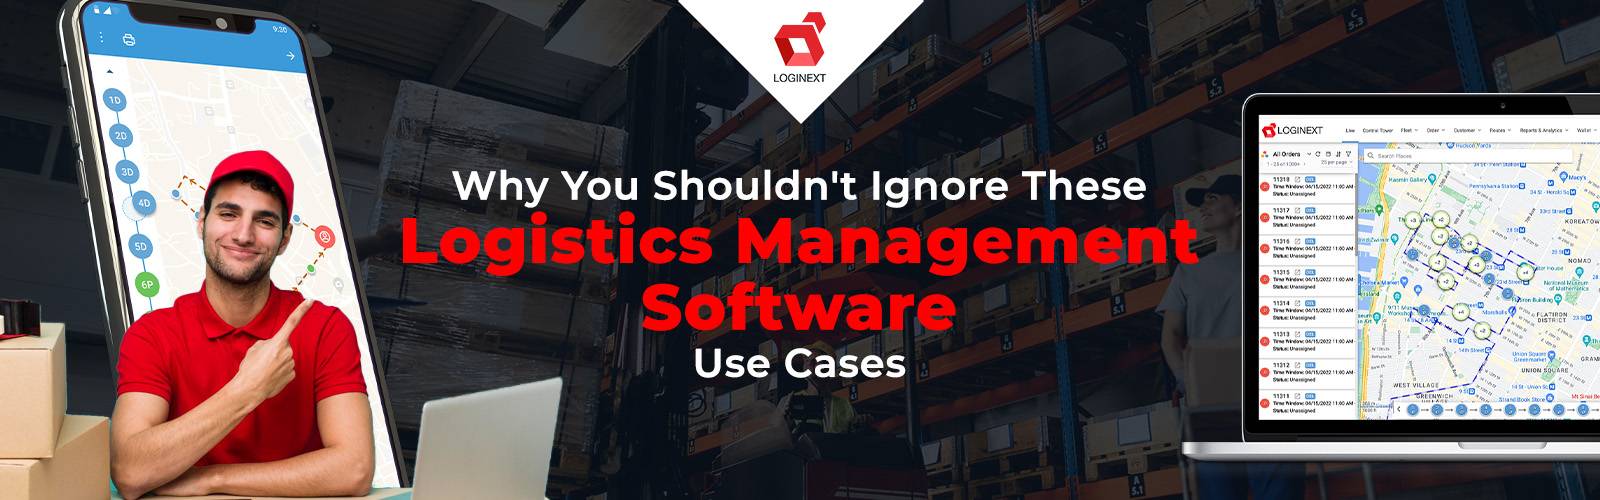 5 risks of neglecting logistics management software use cases